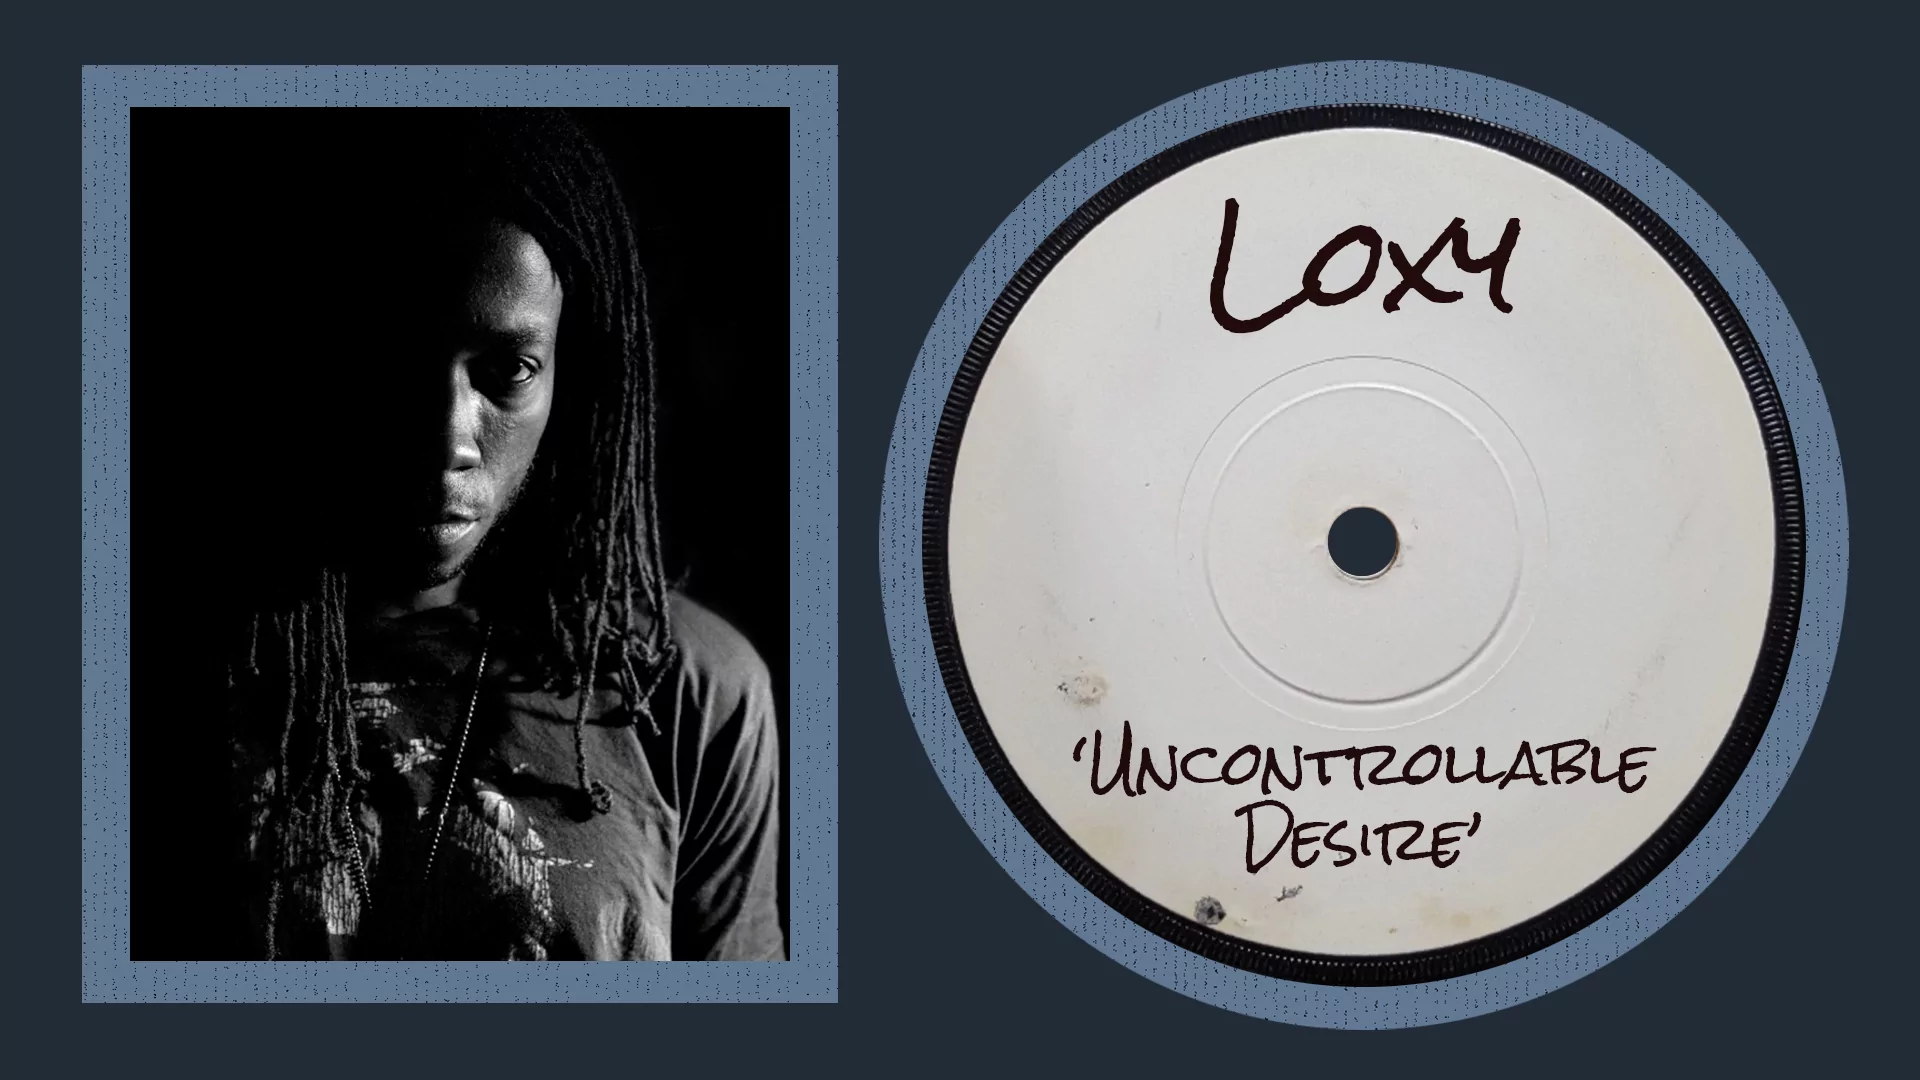 Black-and-white profile image of Loxy with Loxy 'Uncontrollable Desire' dubplate